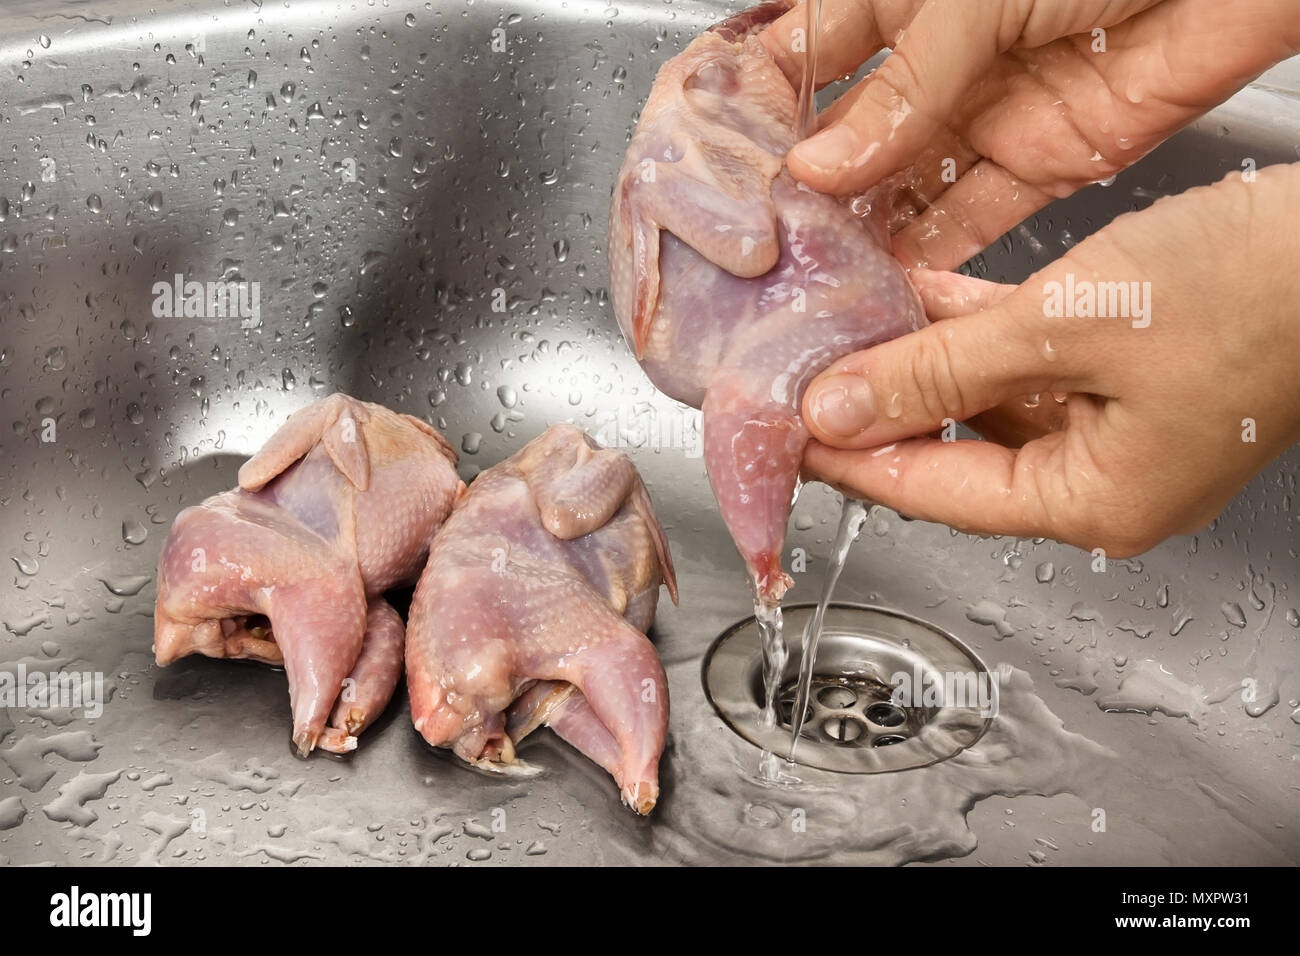 hands washing the quail at kitchen sink before cooking Stock Photo